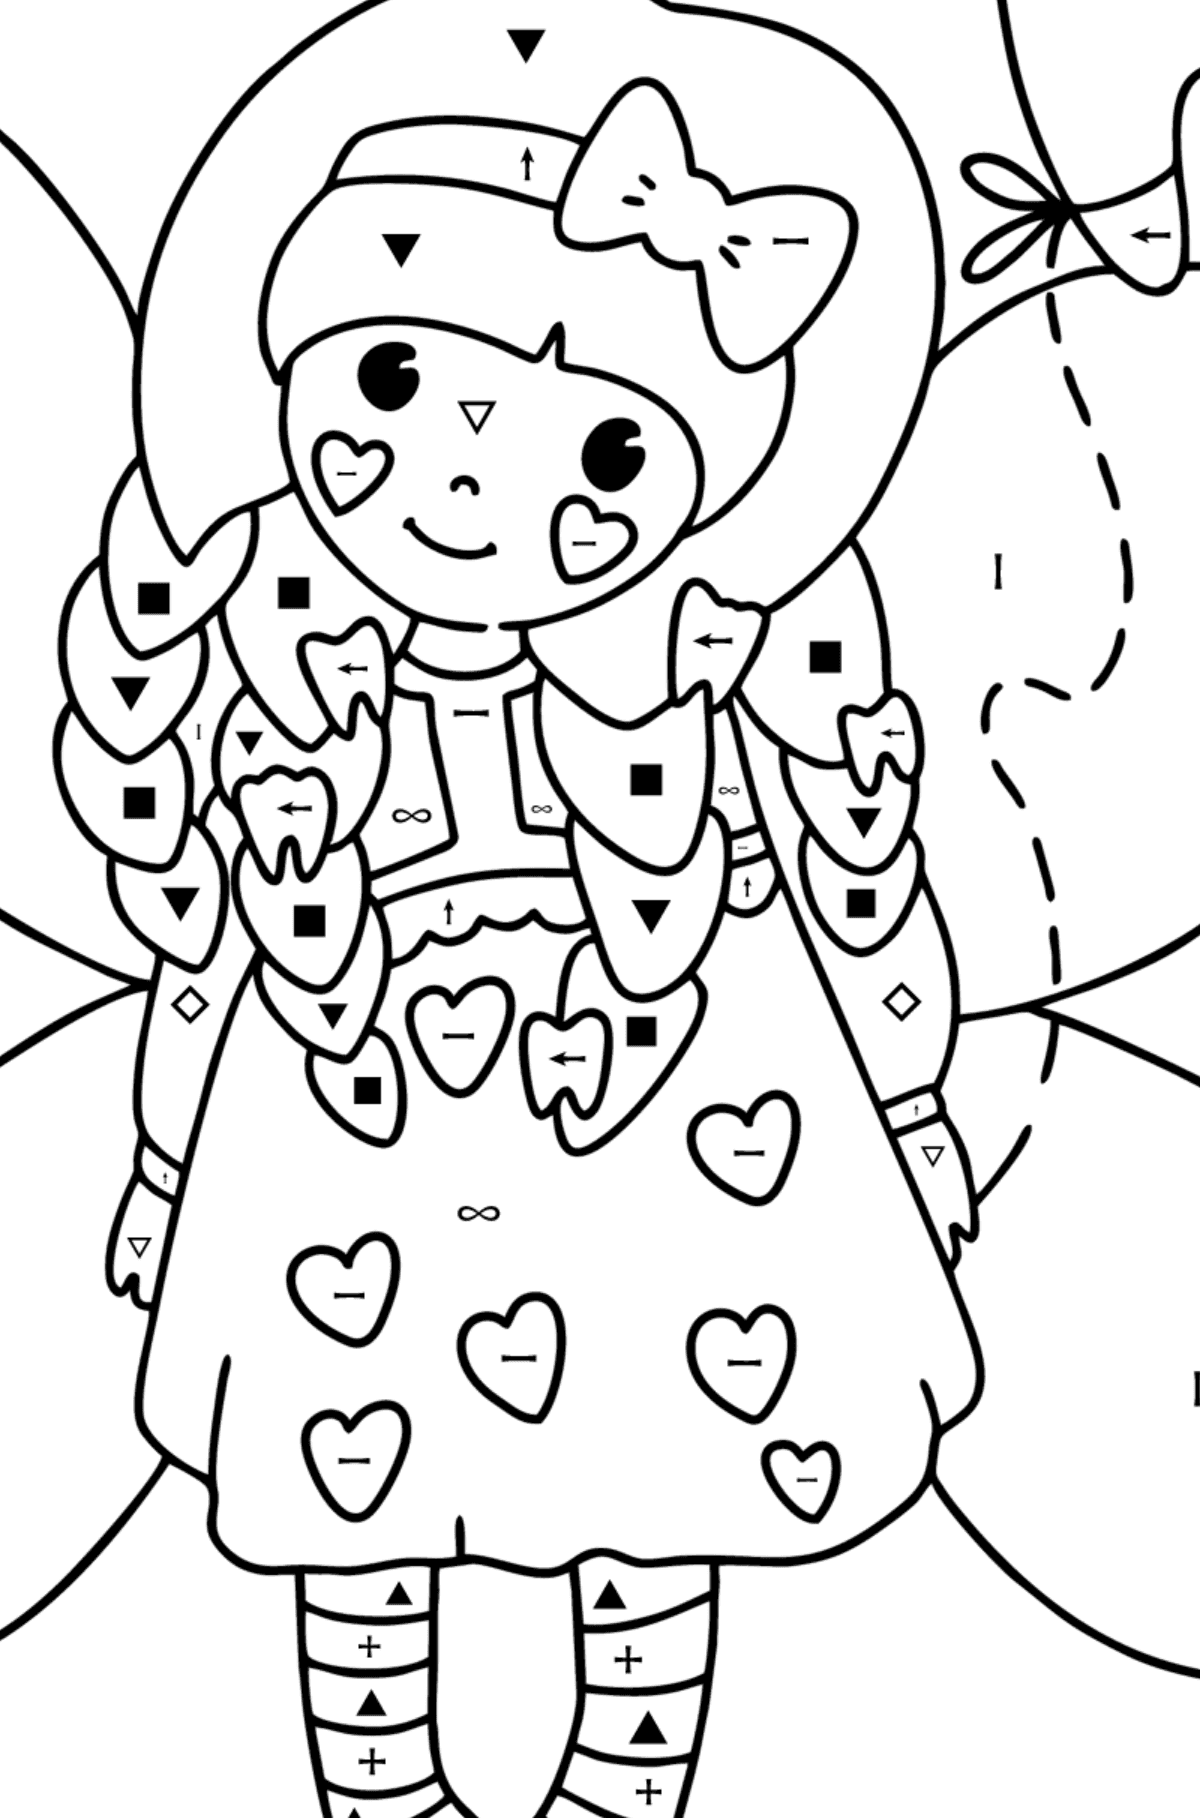 Tooth Fairy coloring page - Coloring by Symbols for Kids